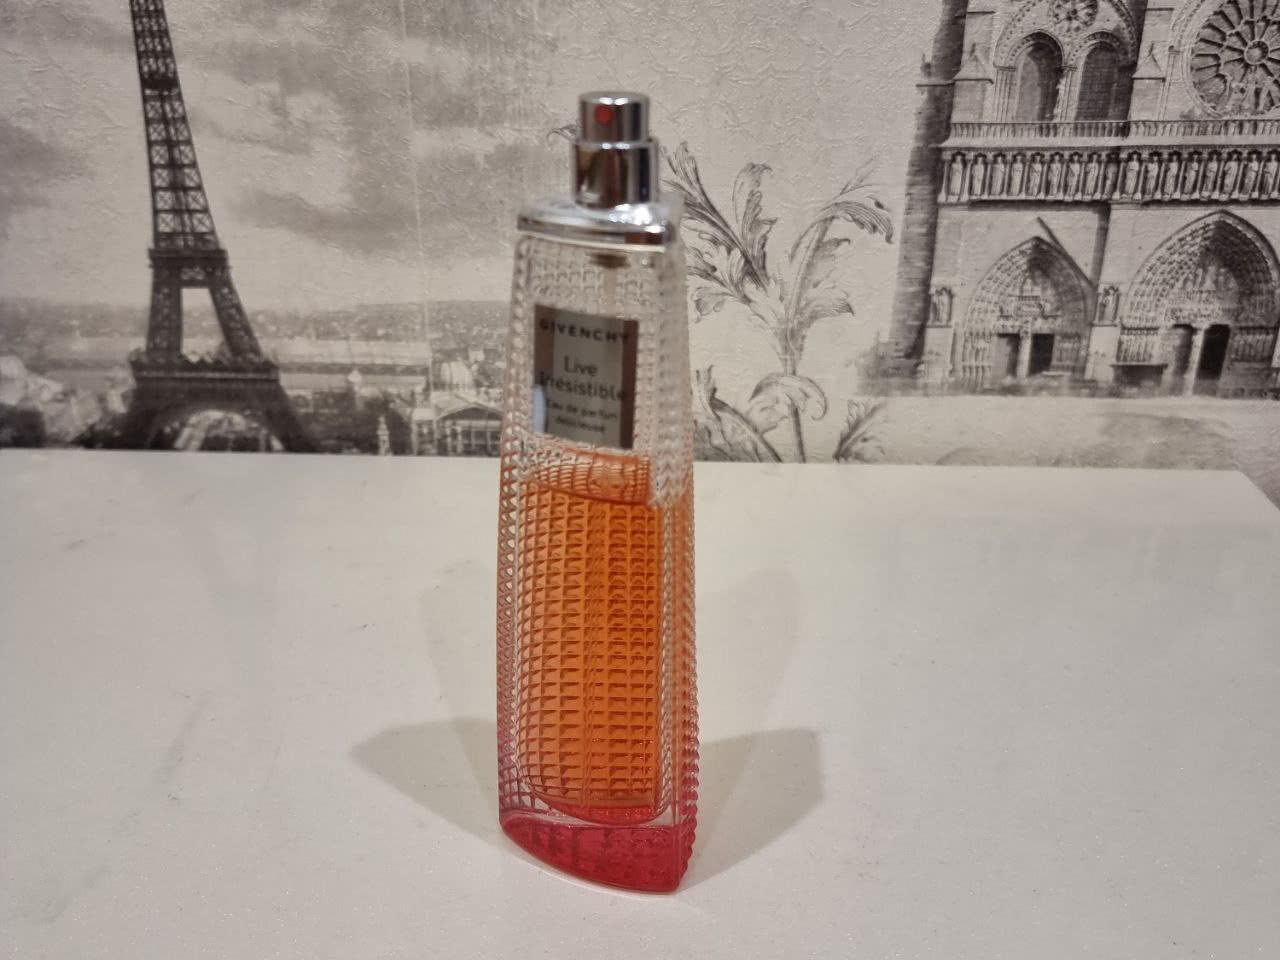 Live Irresistible Delicieuse edp Givenchy Делюсь